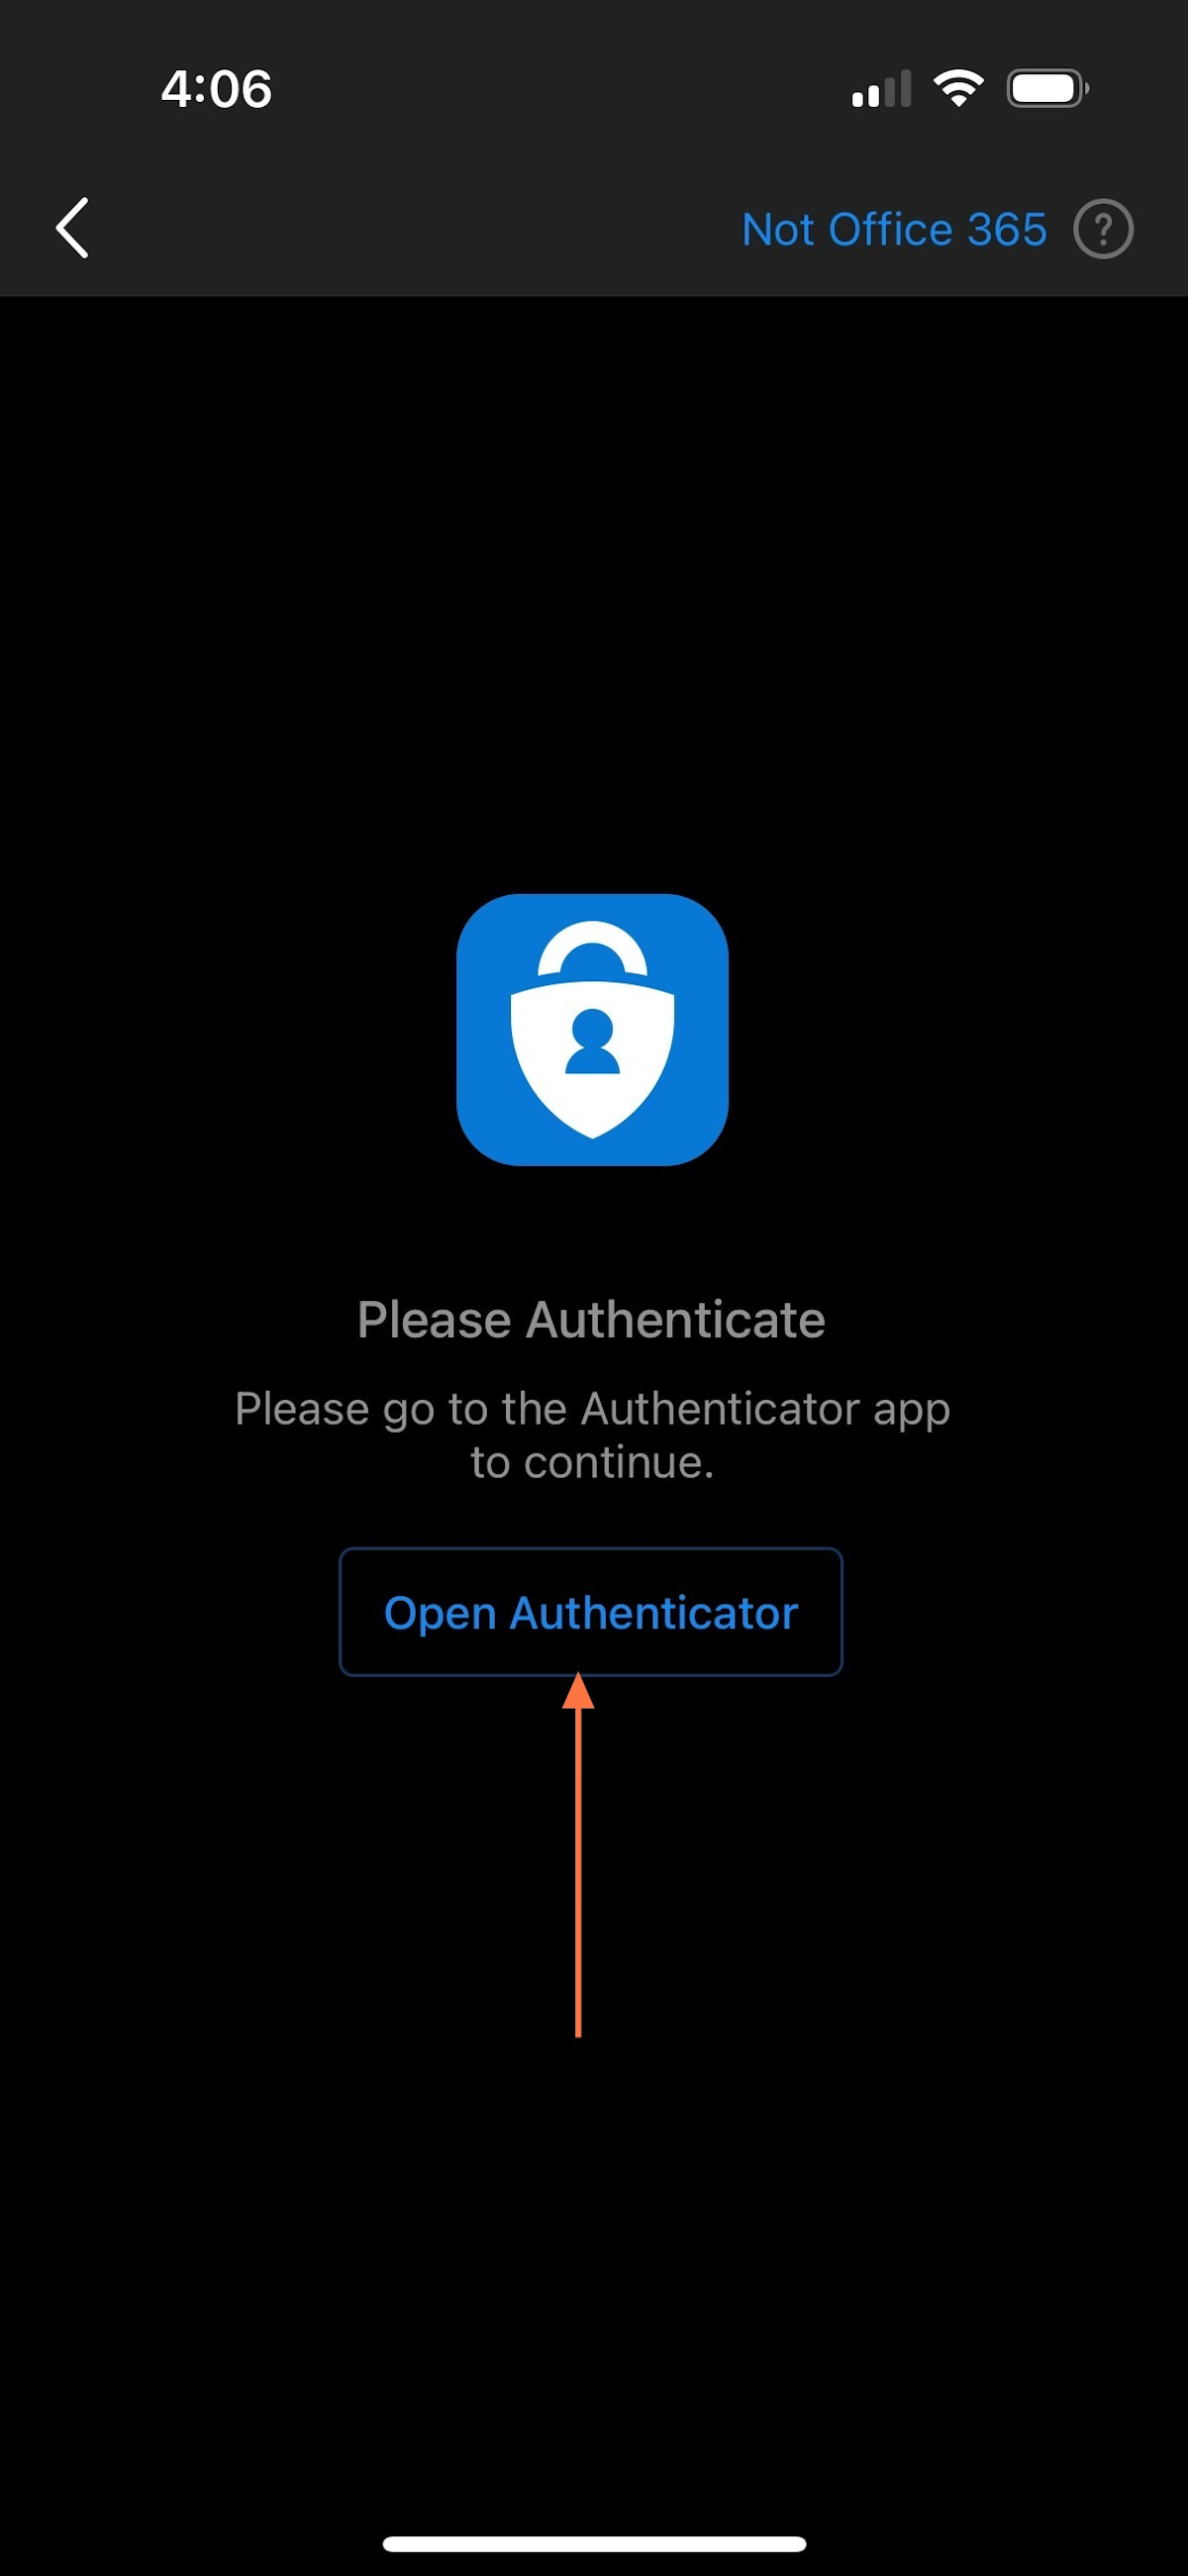 You will then be asked to authenticate your account. Click Open Authenticator.